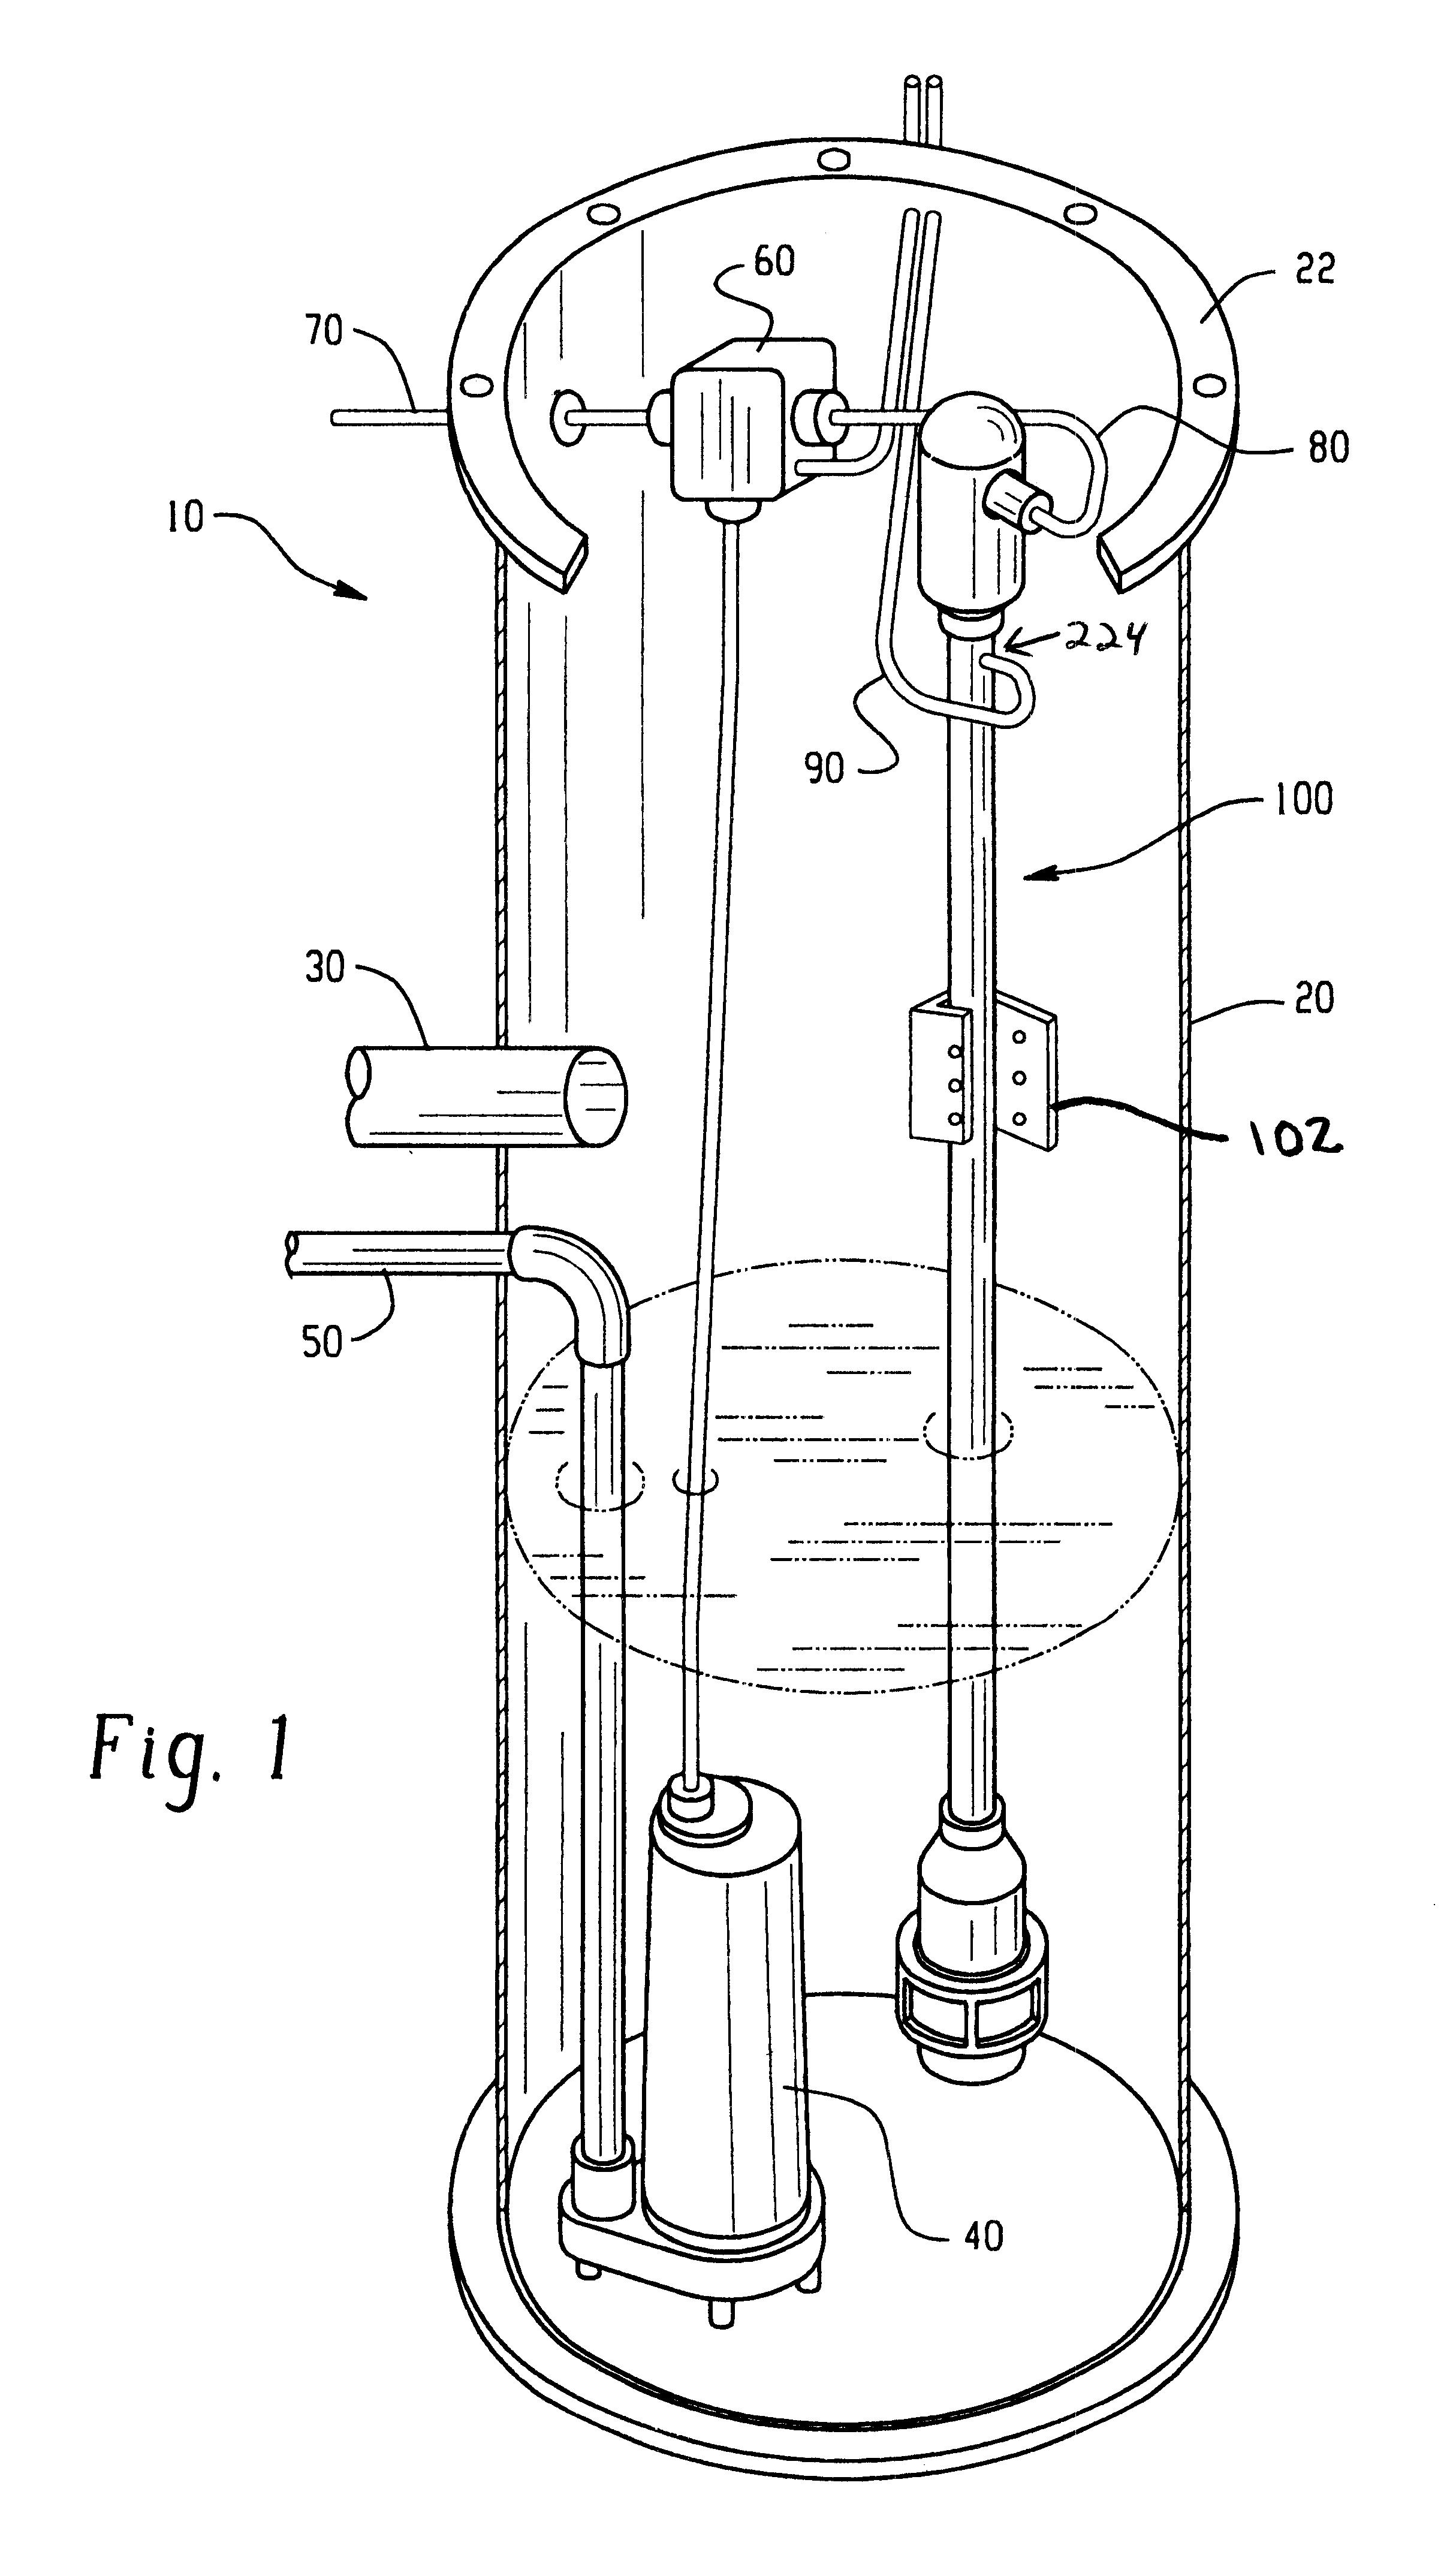 Fluid level sensing and control system